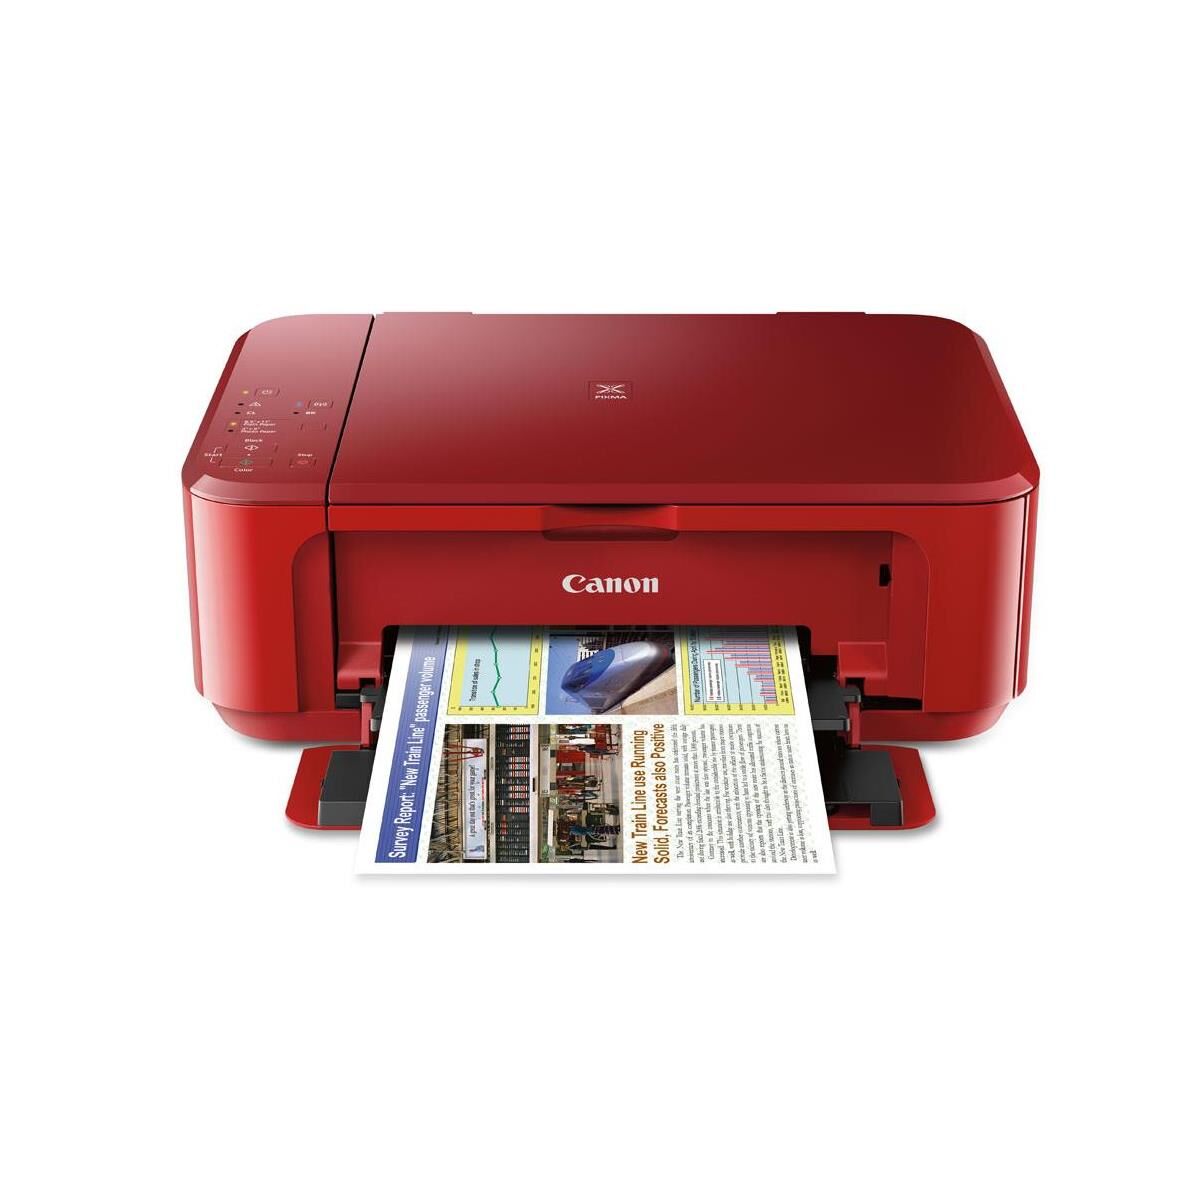 Canon PIXMA MG3620 Wireless Inkjet Photo All-in-One Printer, Red